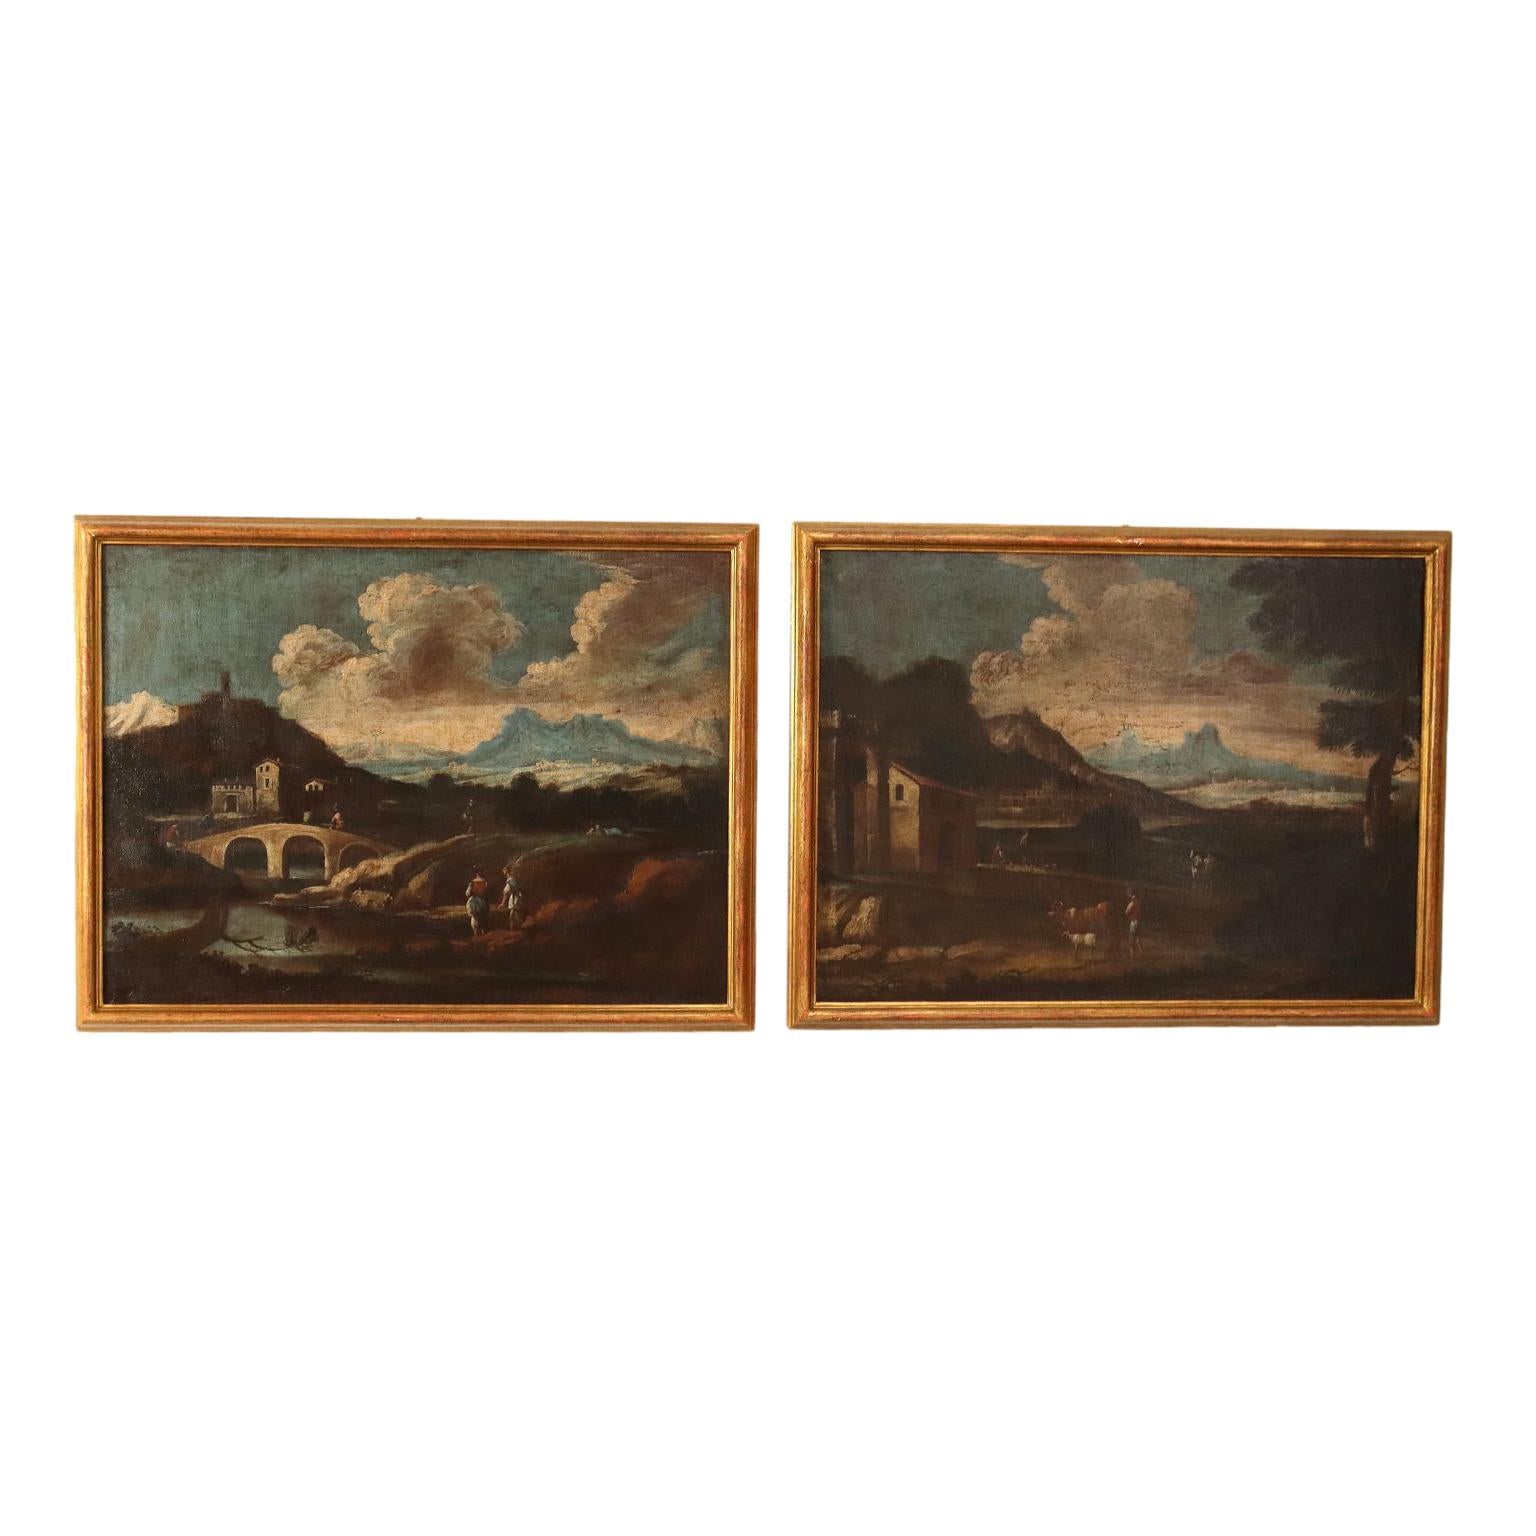 Unknown Landscape Painting - Couple of Paintings Oil on Canvas Northern Europe XVII-XVIII Century